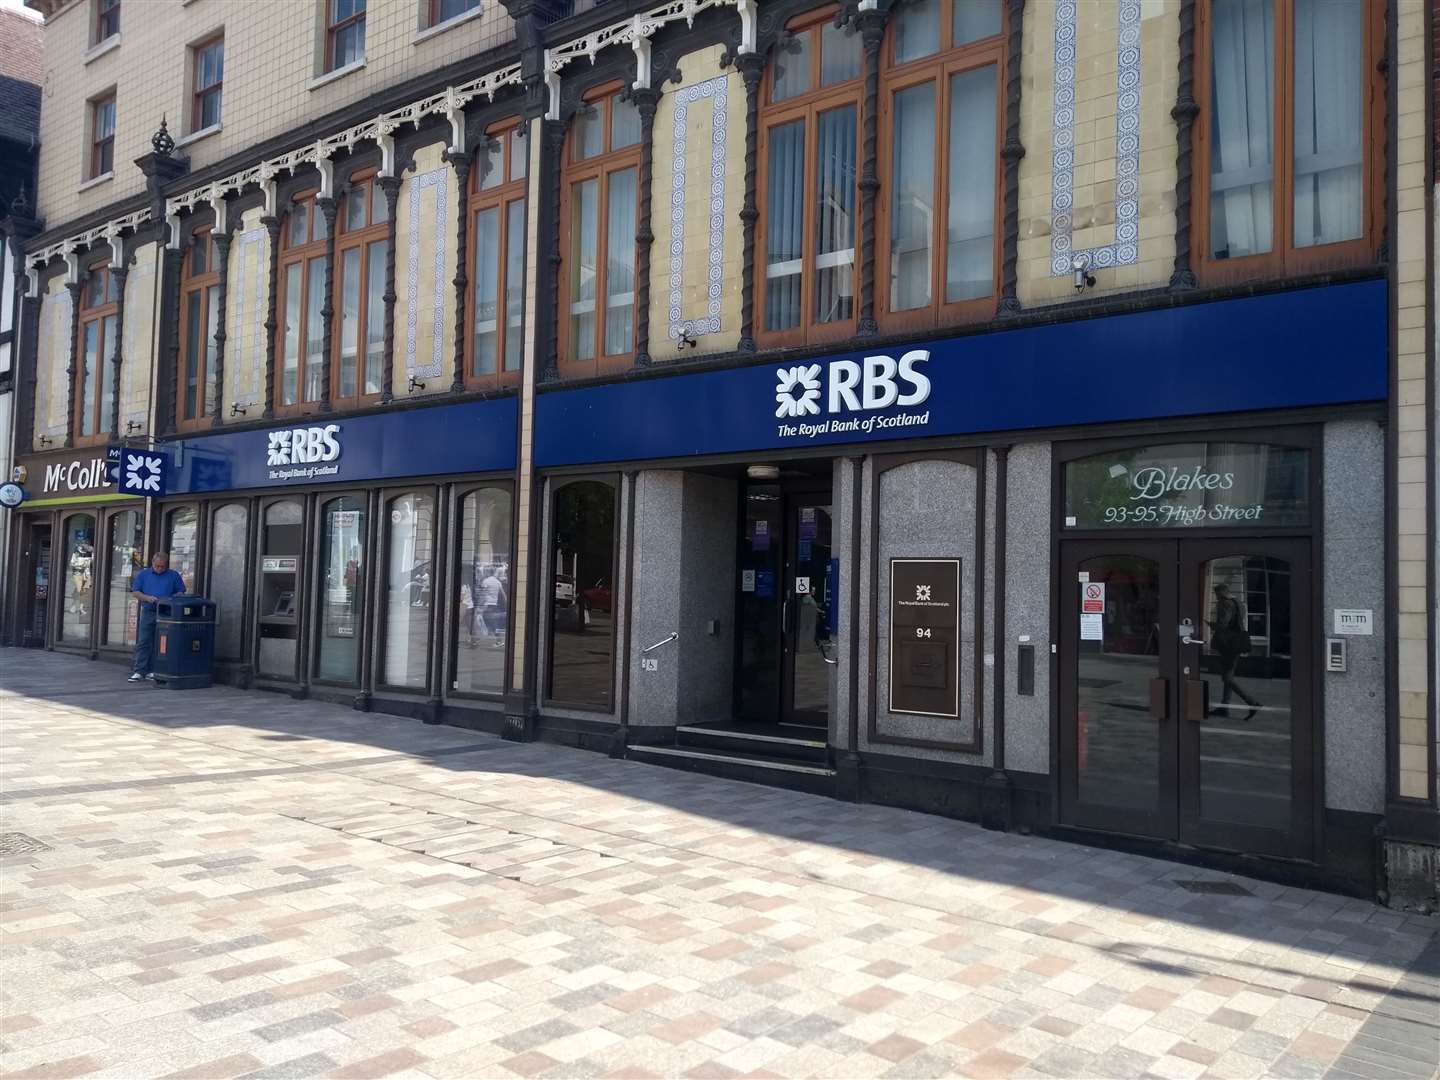 Plans for an Indian restaurant to take over the former Royal Bank of Scotland in Jubliee Square, Maidstone, have been submitted